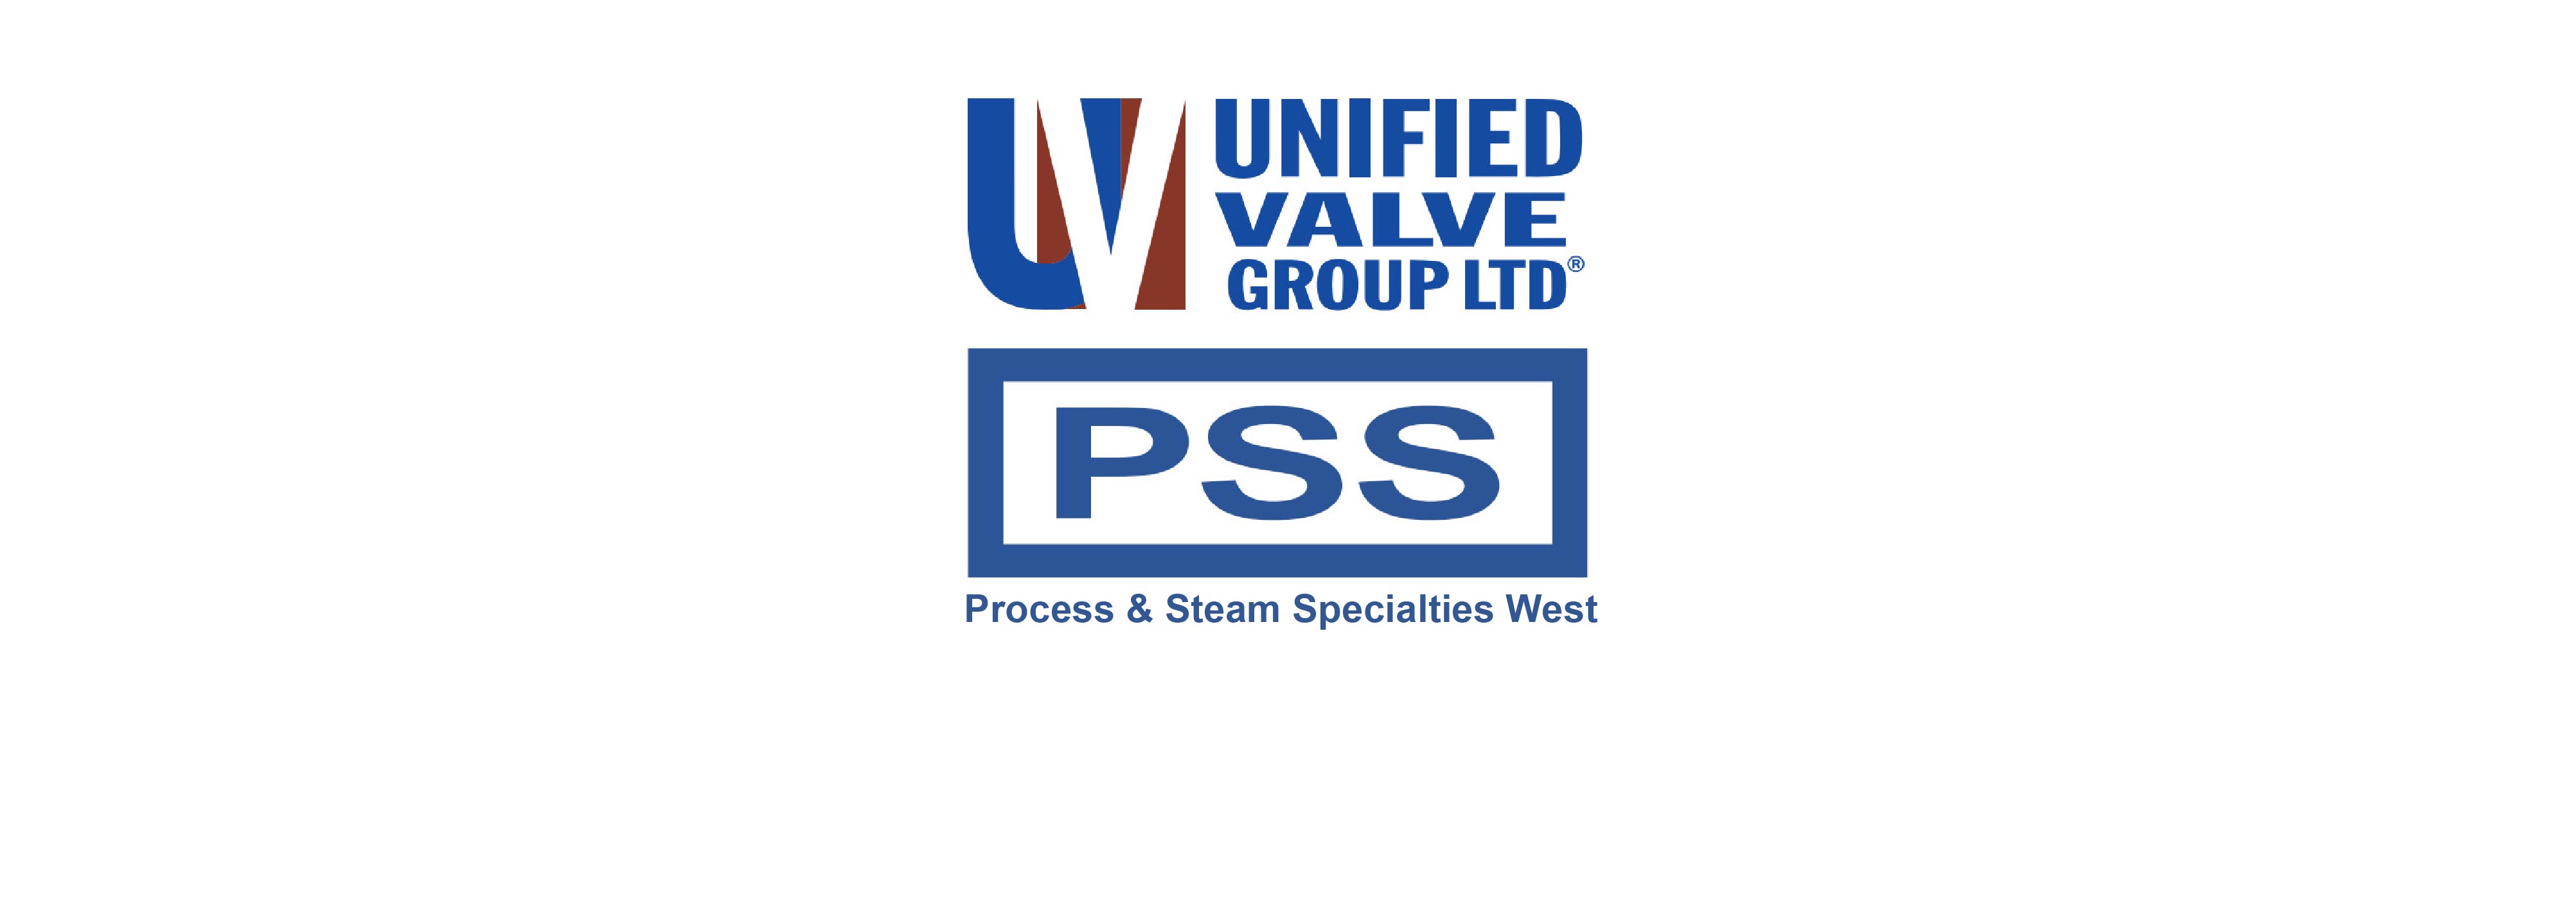 Unified Valve Group Is Growing